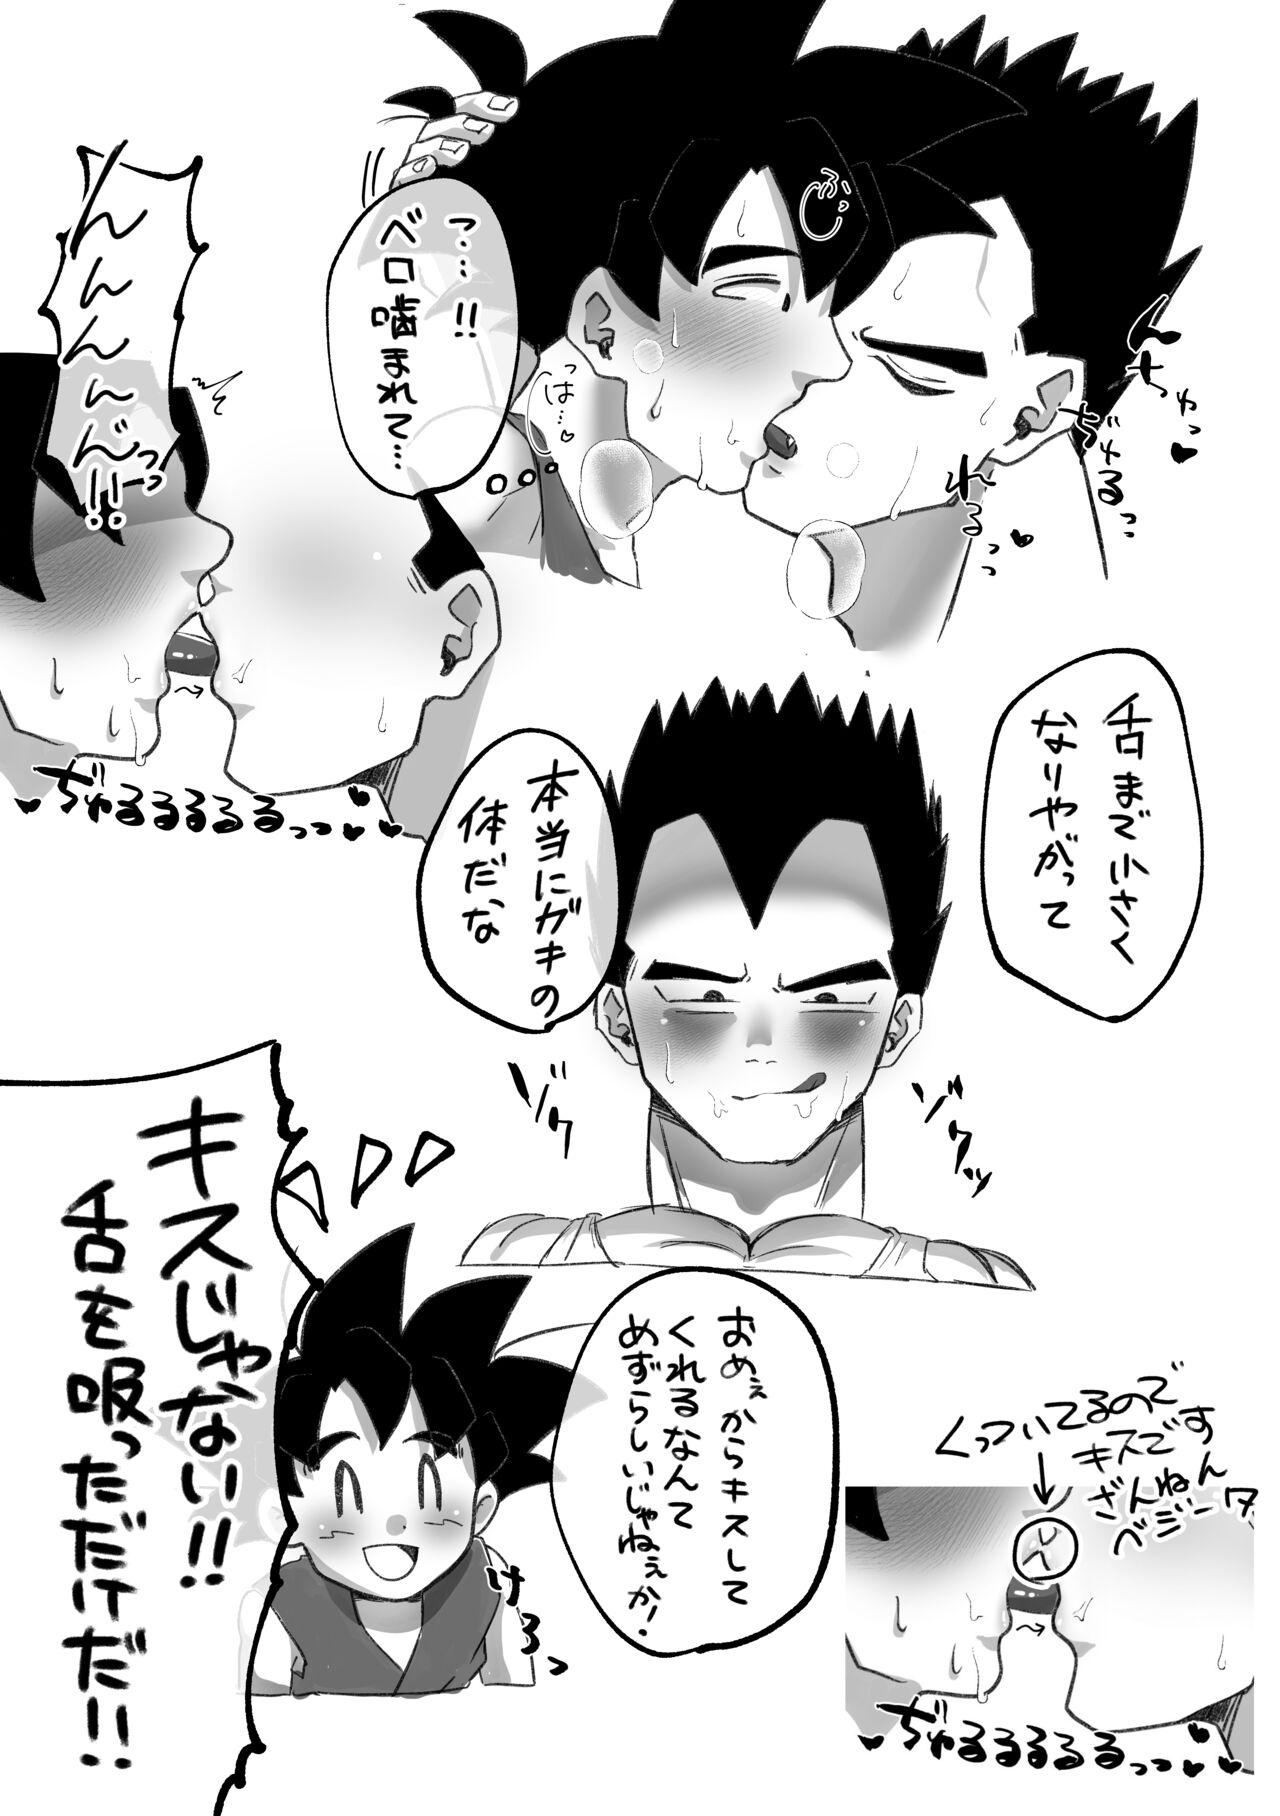 Best Blowjob Ever GT no Dosukebe na KakaVege - Dragon ball gt Fake - Page 4